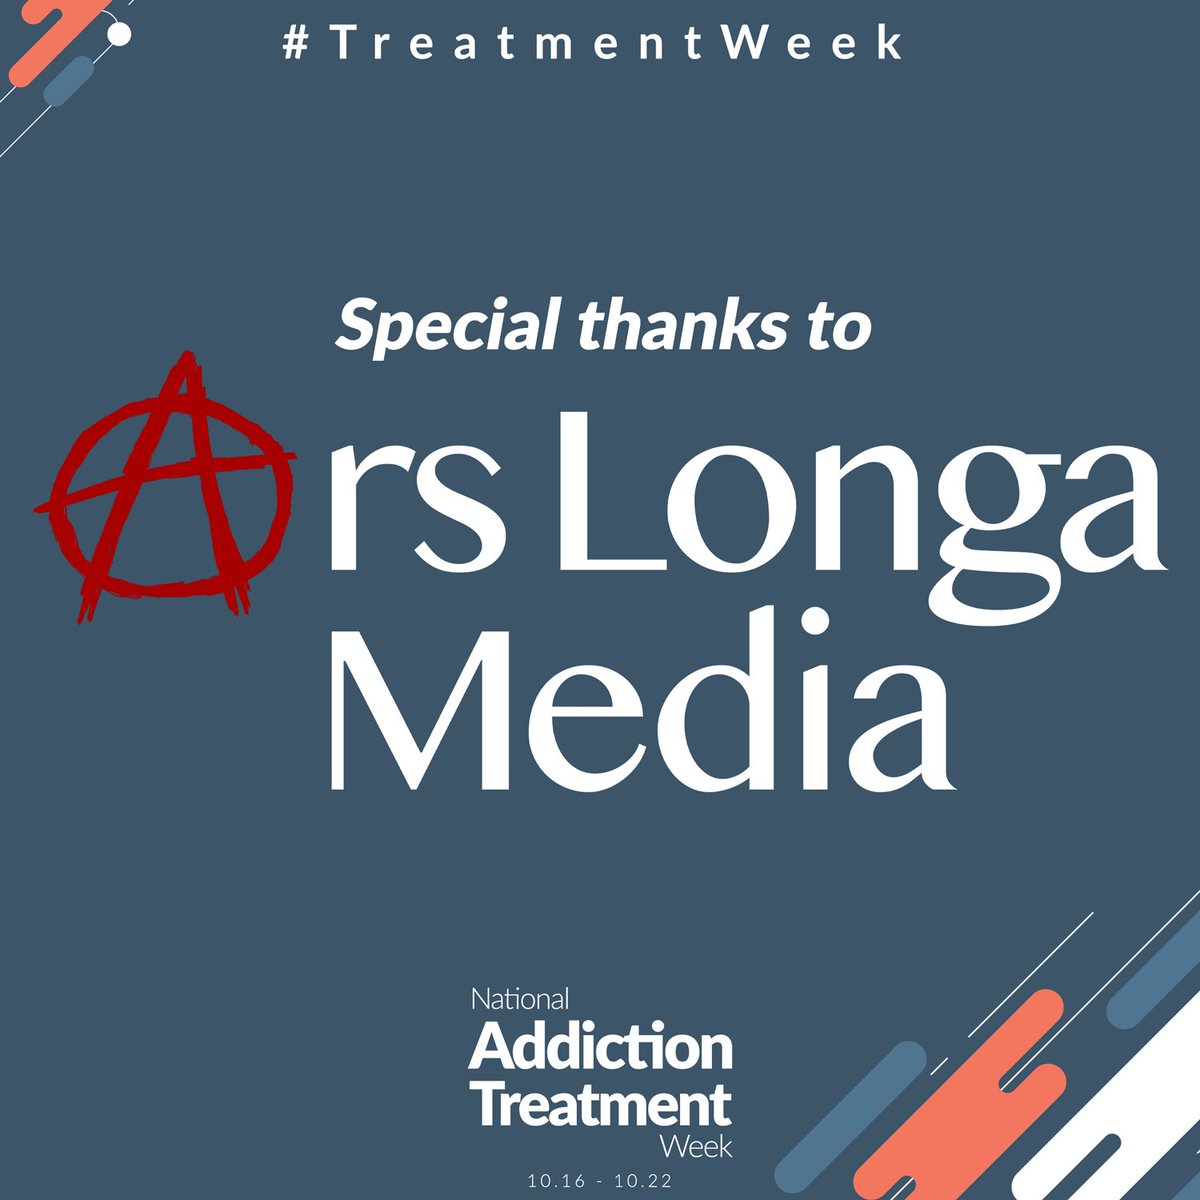 A special thank you going out to @ArsLongaMedia for their amazing support of #TreatmentWeek 2023!

#NATW #AddictionMedicine #AddictionTreatment #NationalAddictionTreatmentWeek #ASAM #TreatAddictionSaveLives